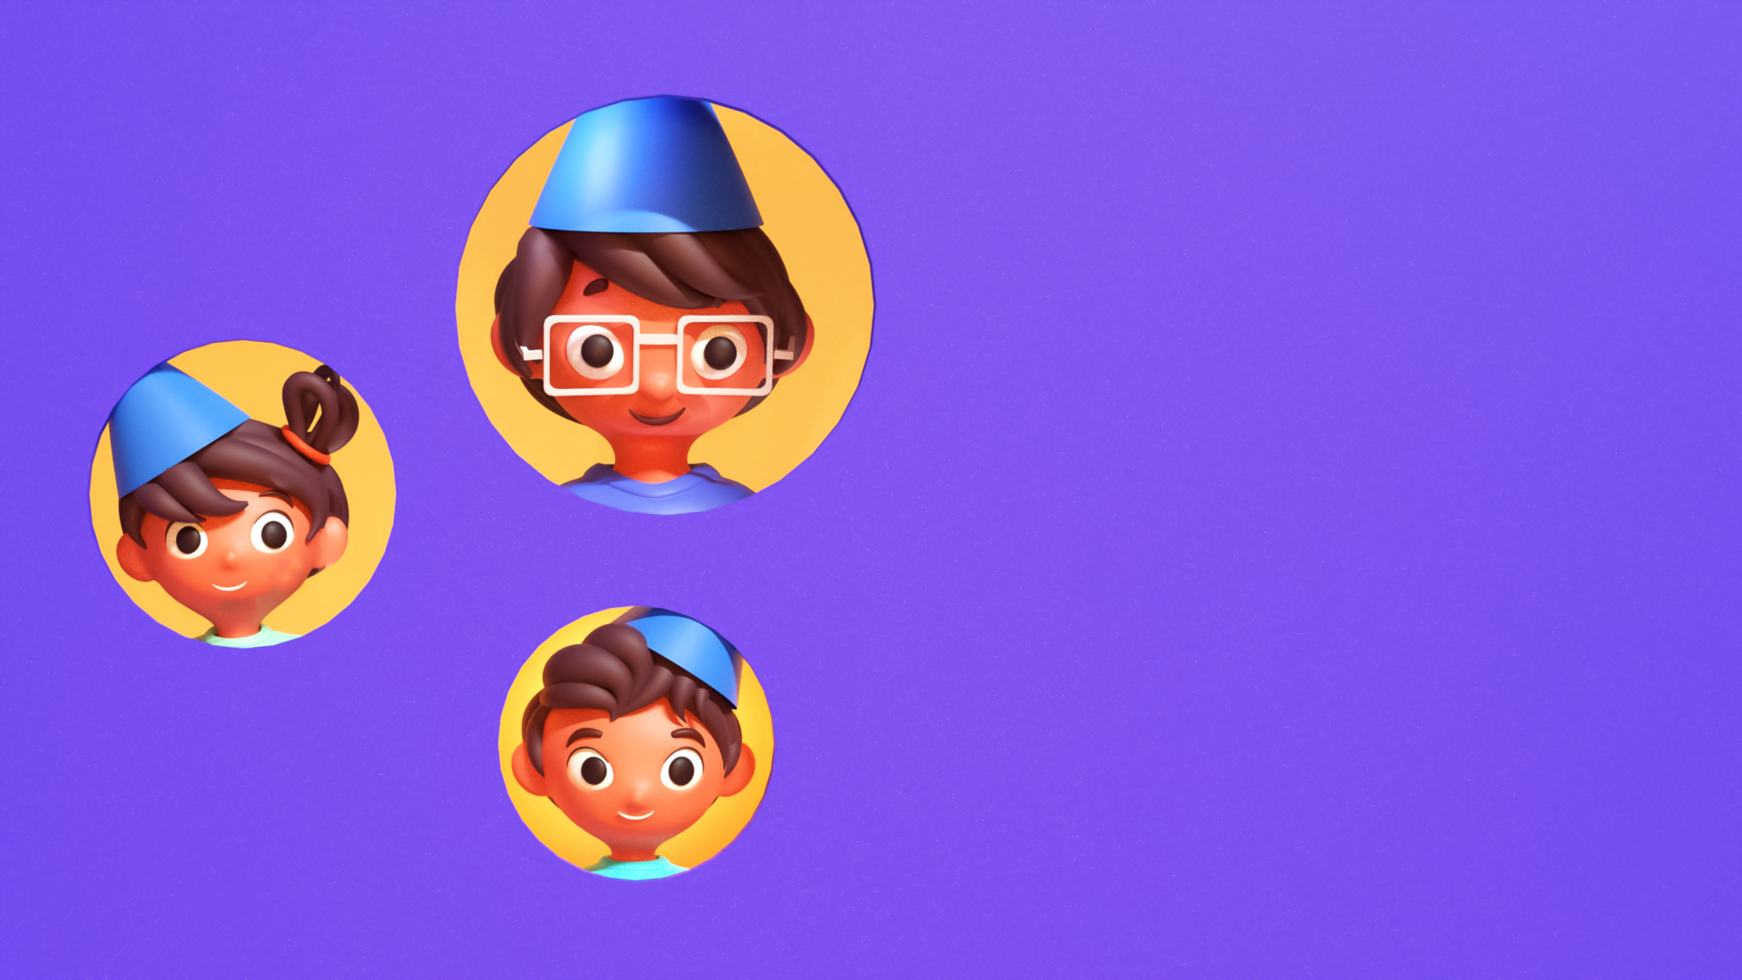 3D Illustration Of Cartoon Man OR Father And Children Face On Purple Background With Copy Space. psd